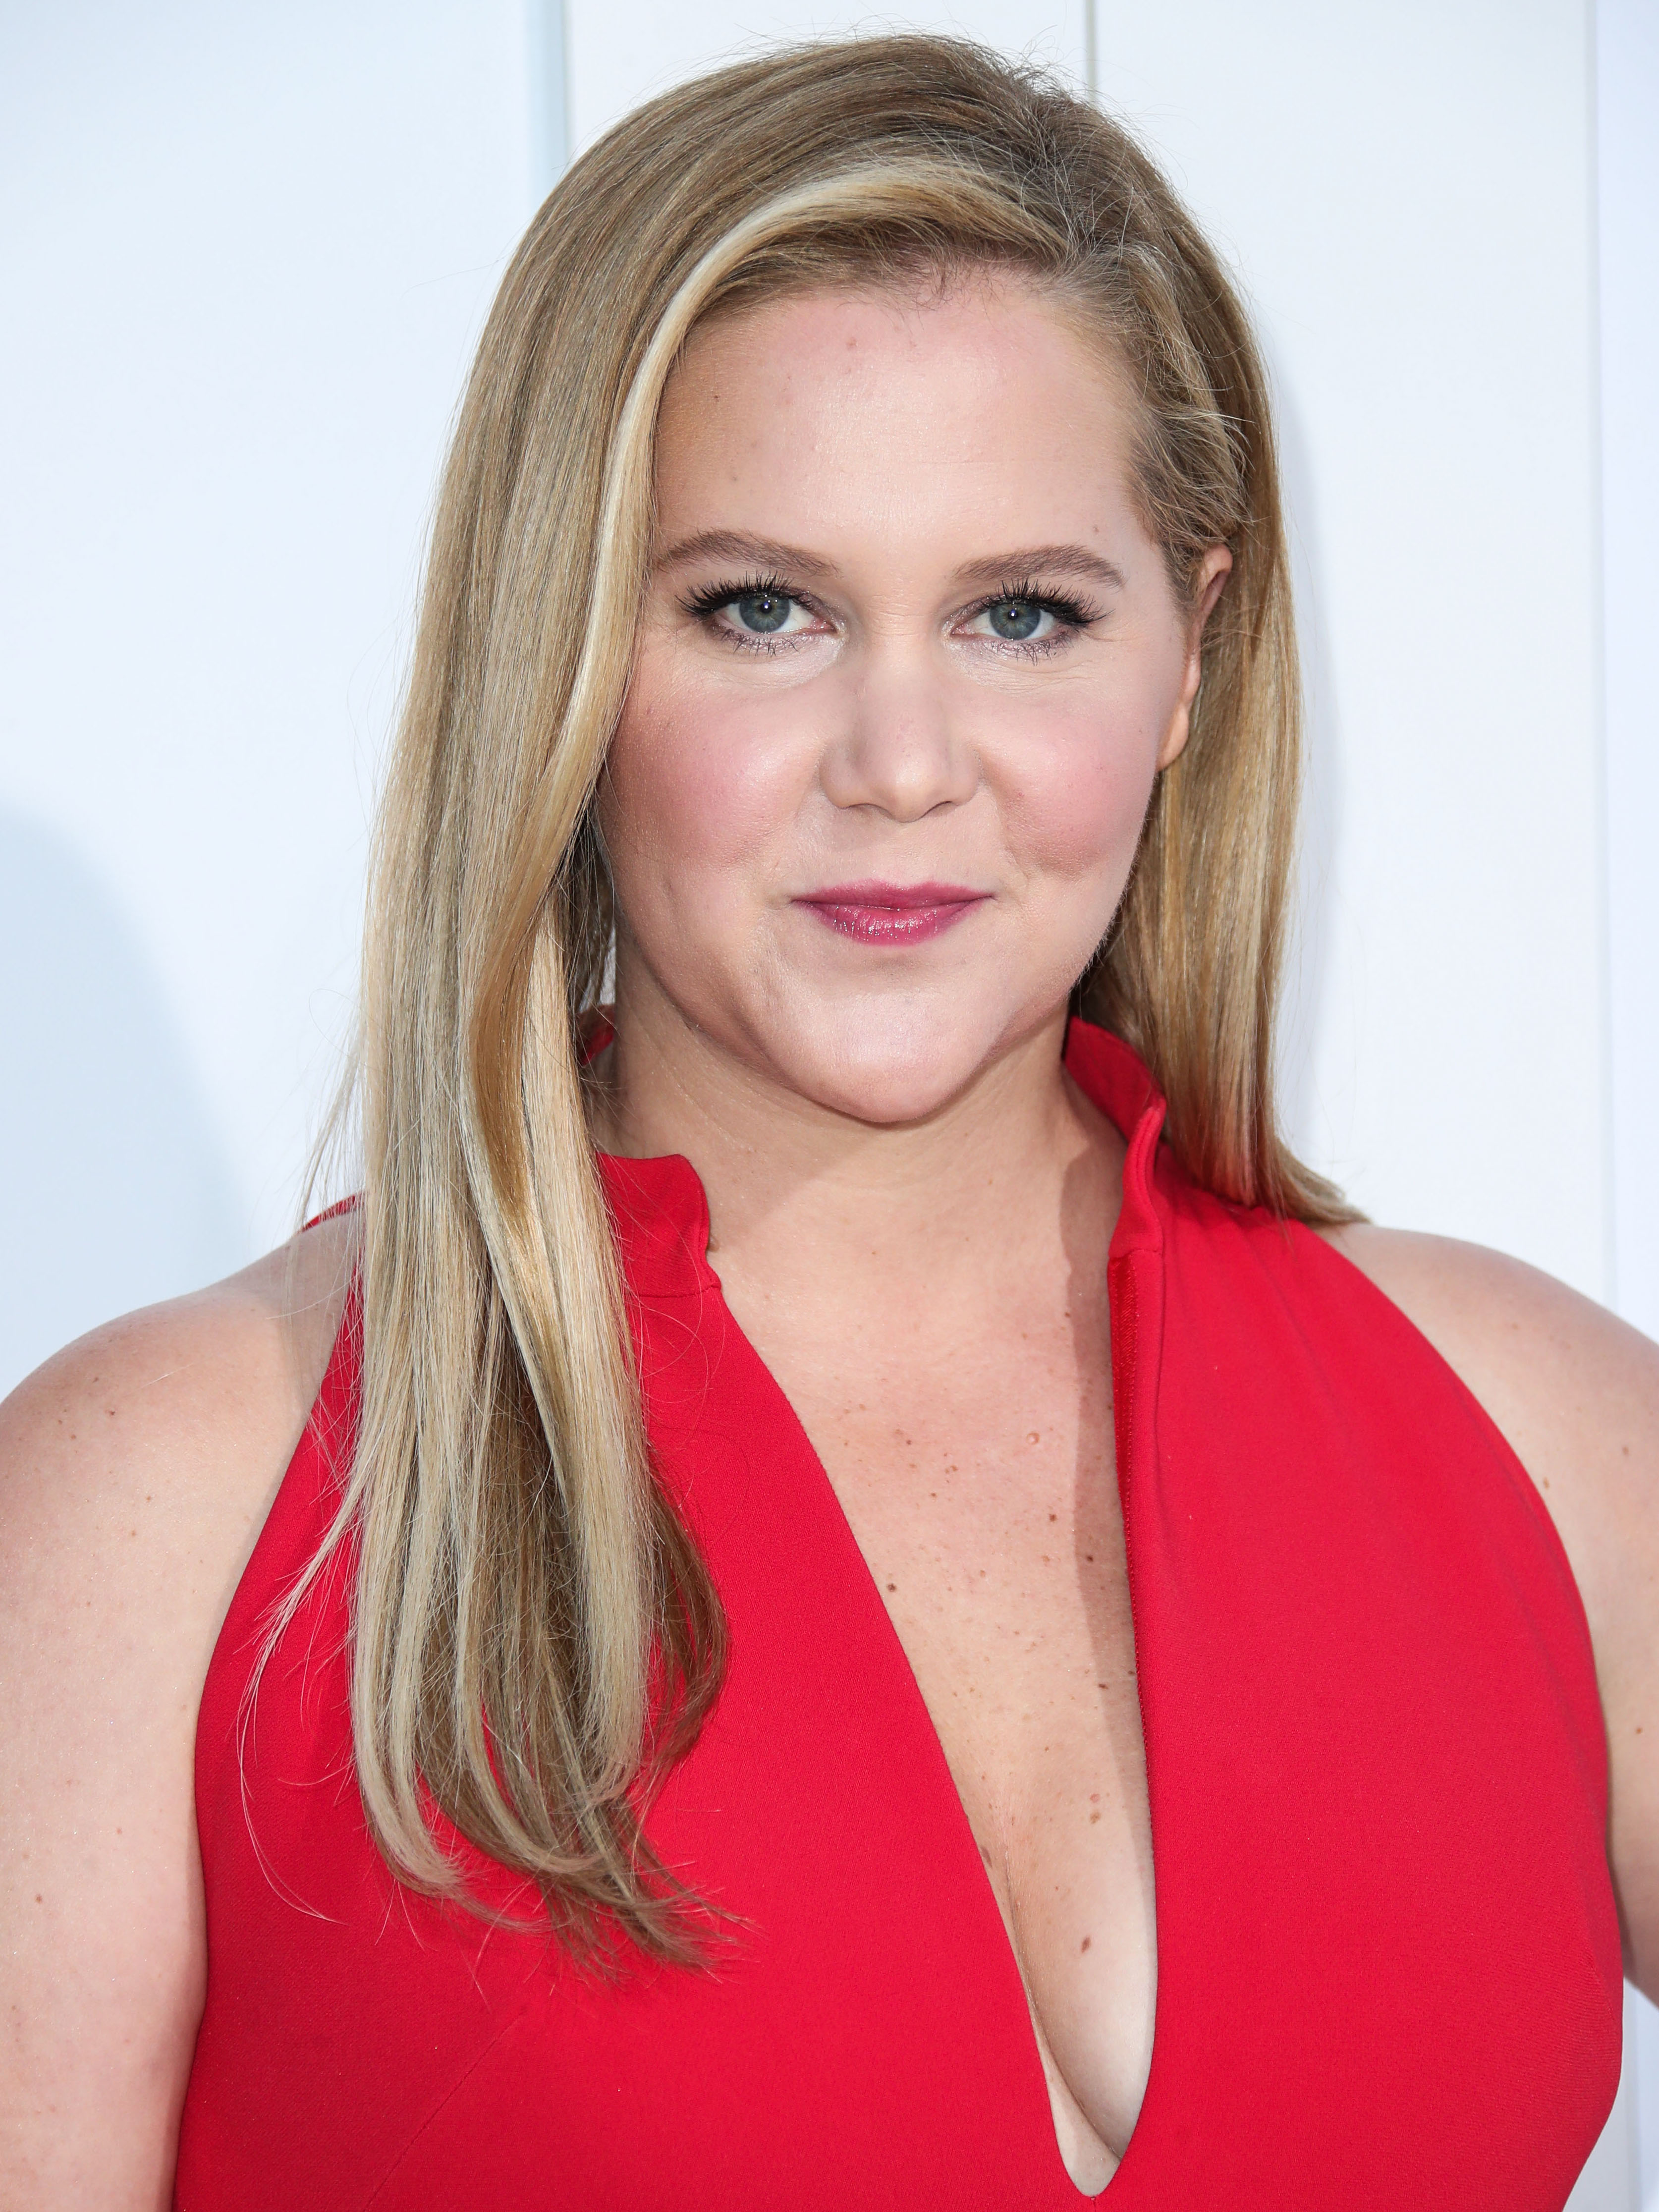 amanda kopka recommends amy schumer fully nude pic